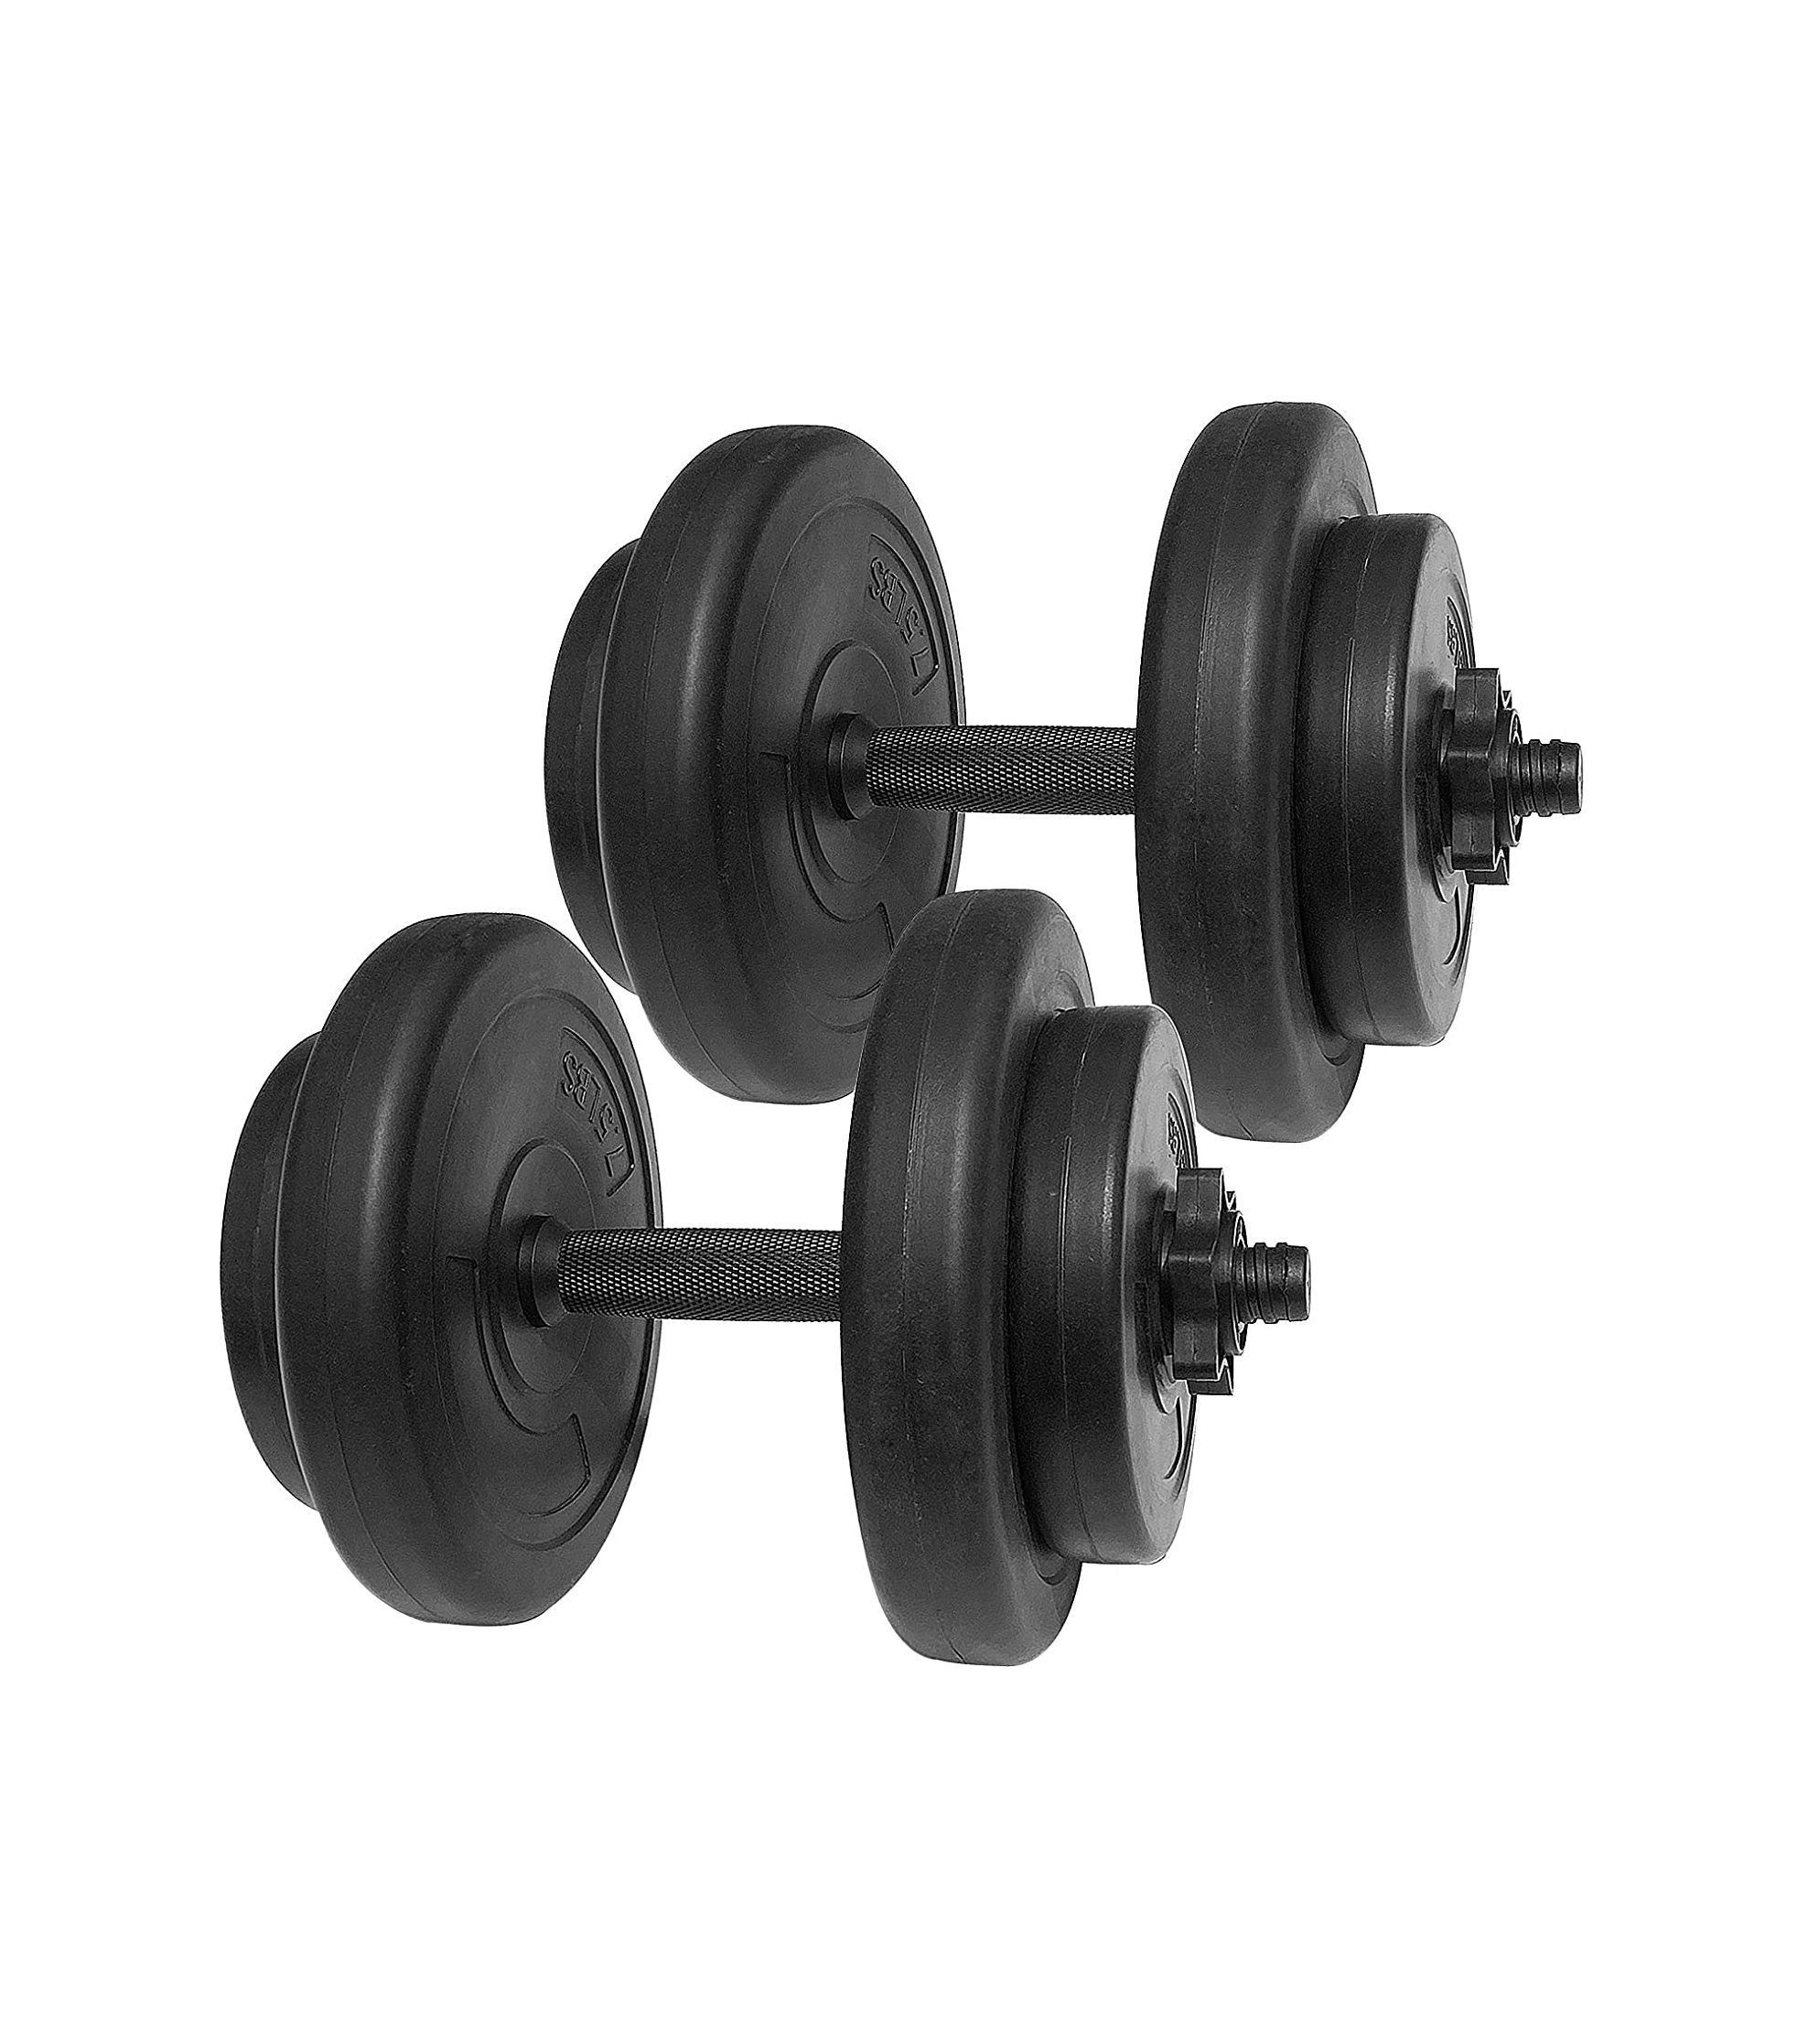 16kg Vinyl Hand Dumbbell Workout Weight Set Including Stand NEW 